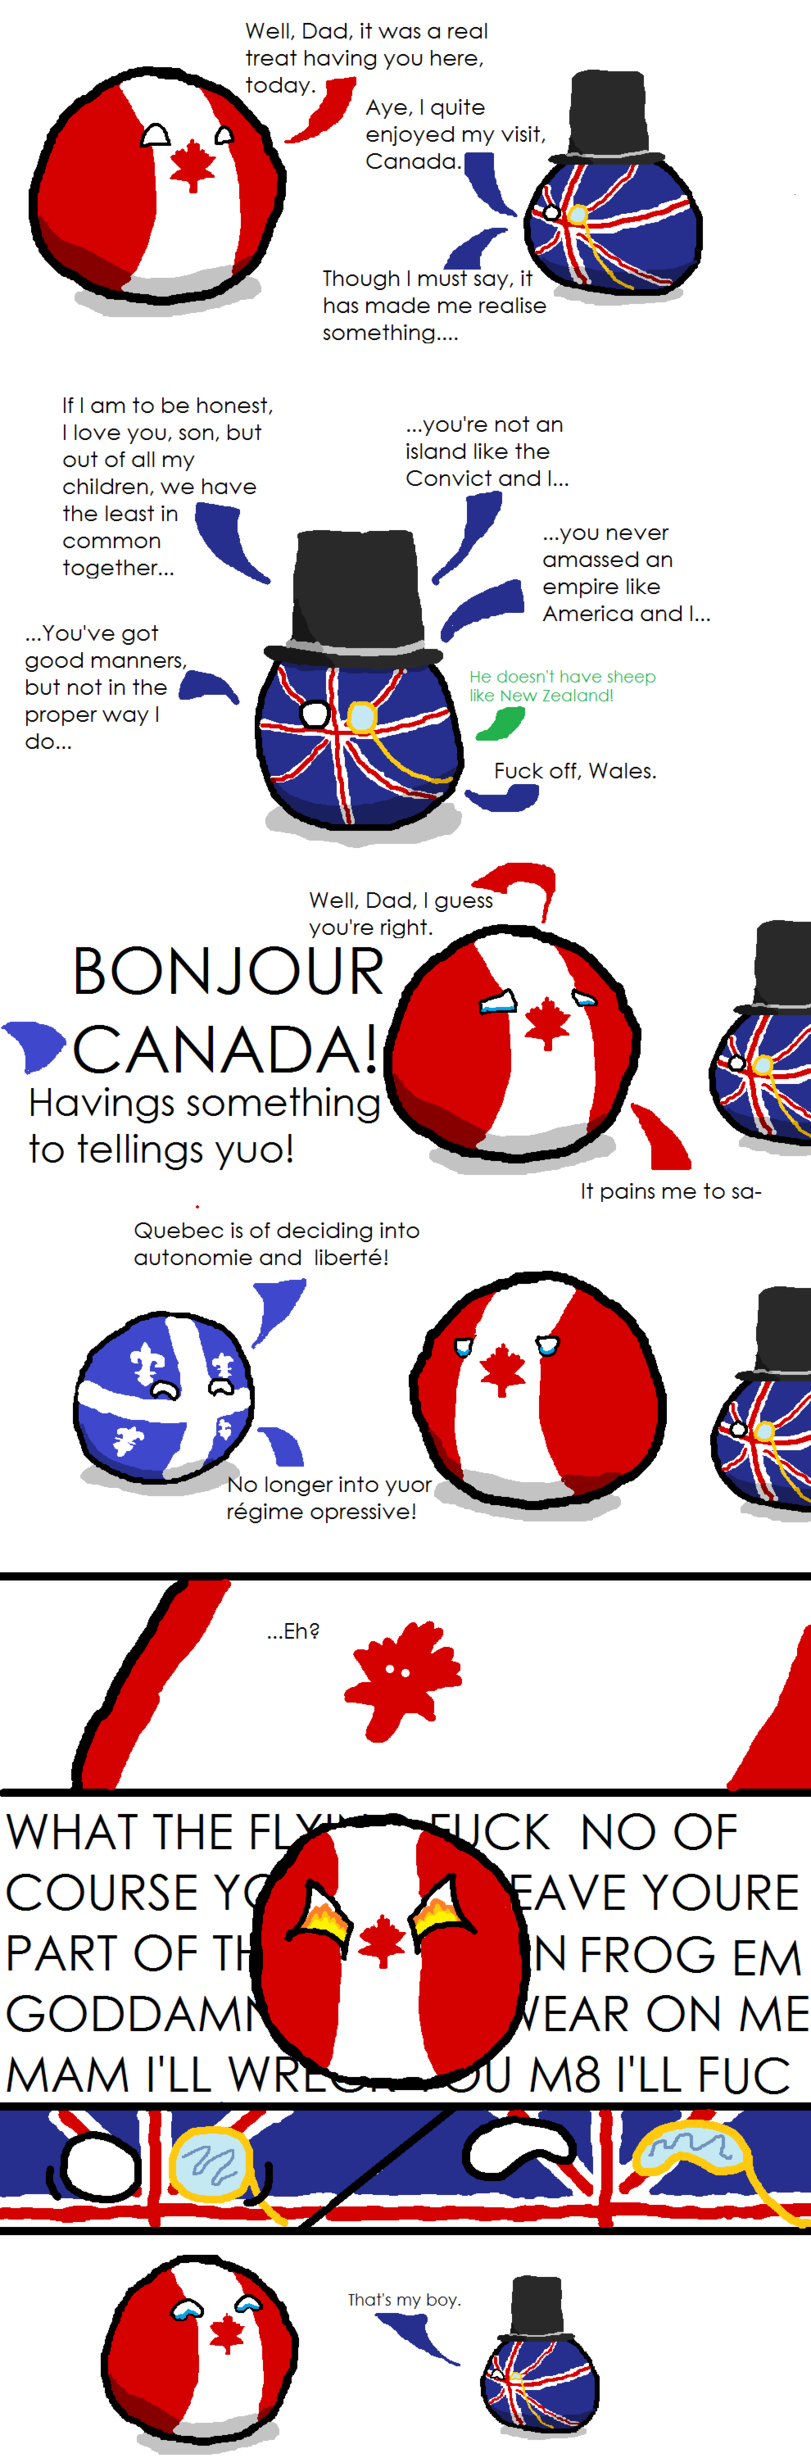 Quebec, it's like France but worse.